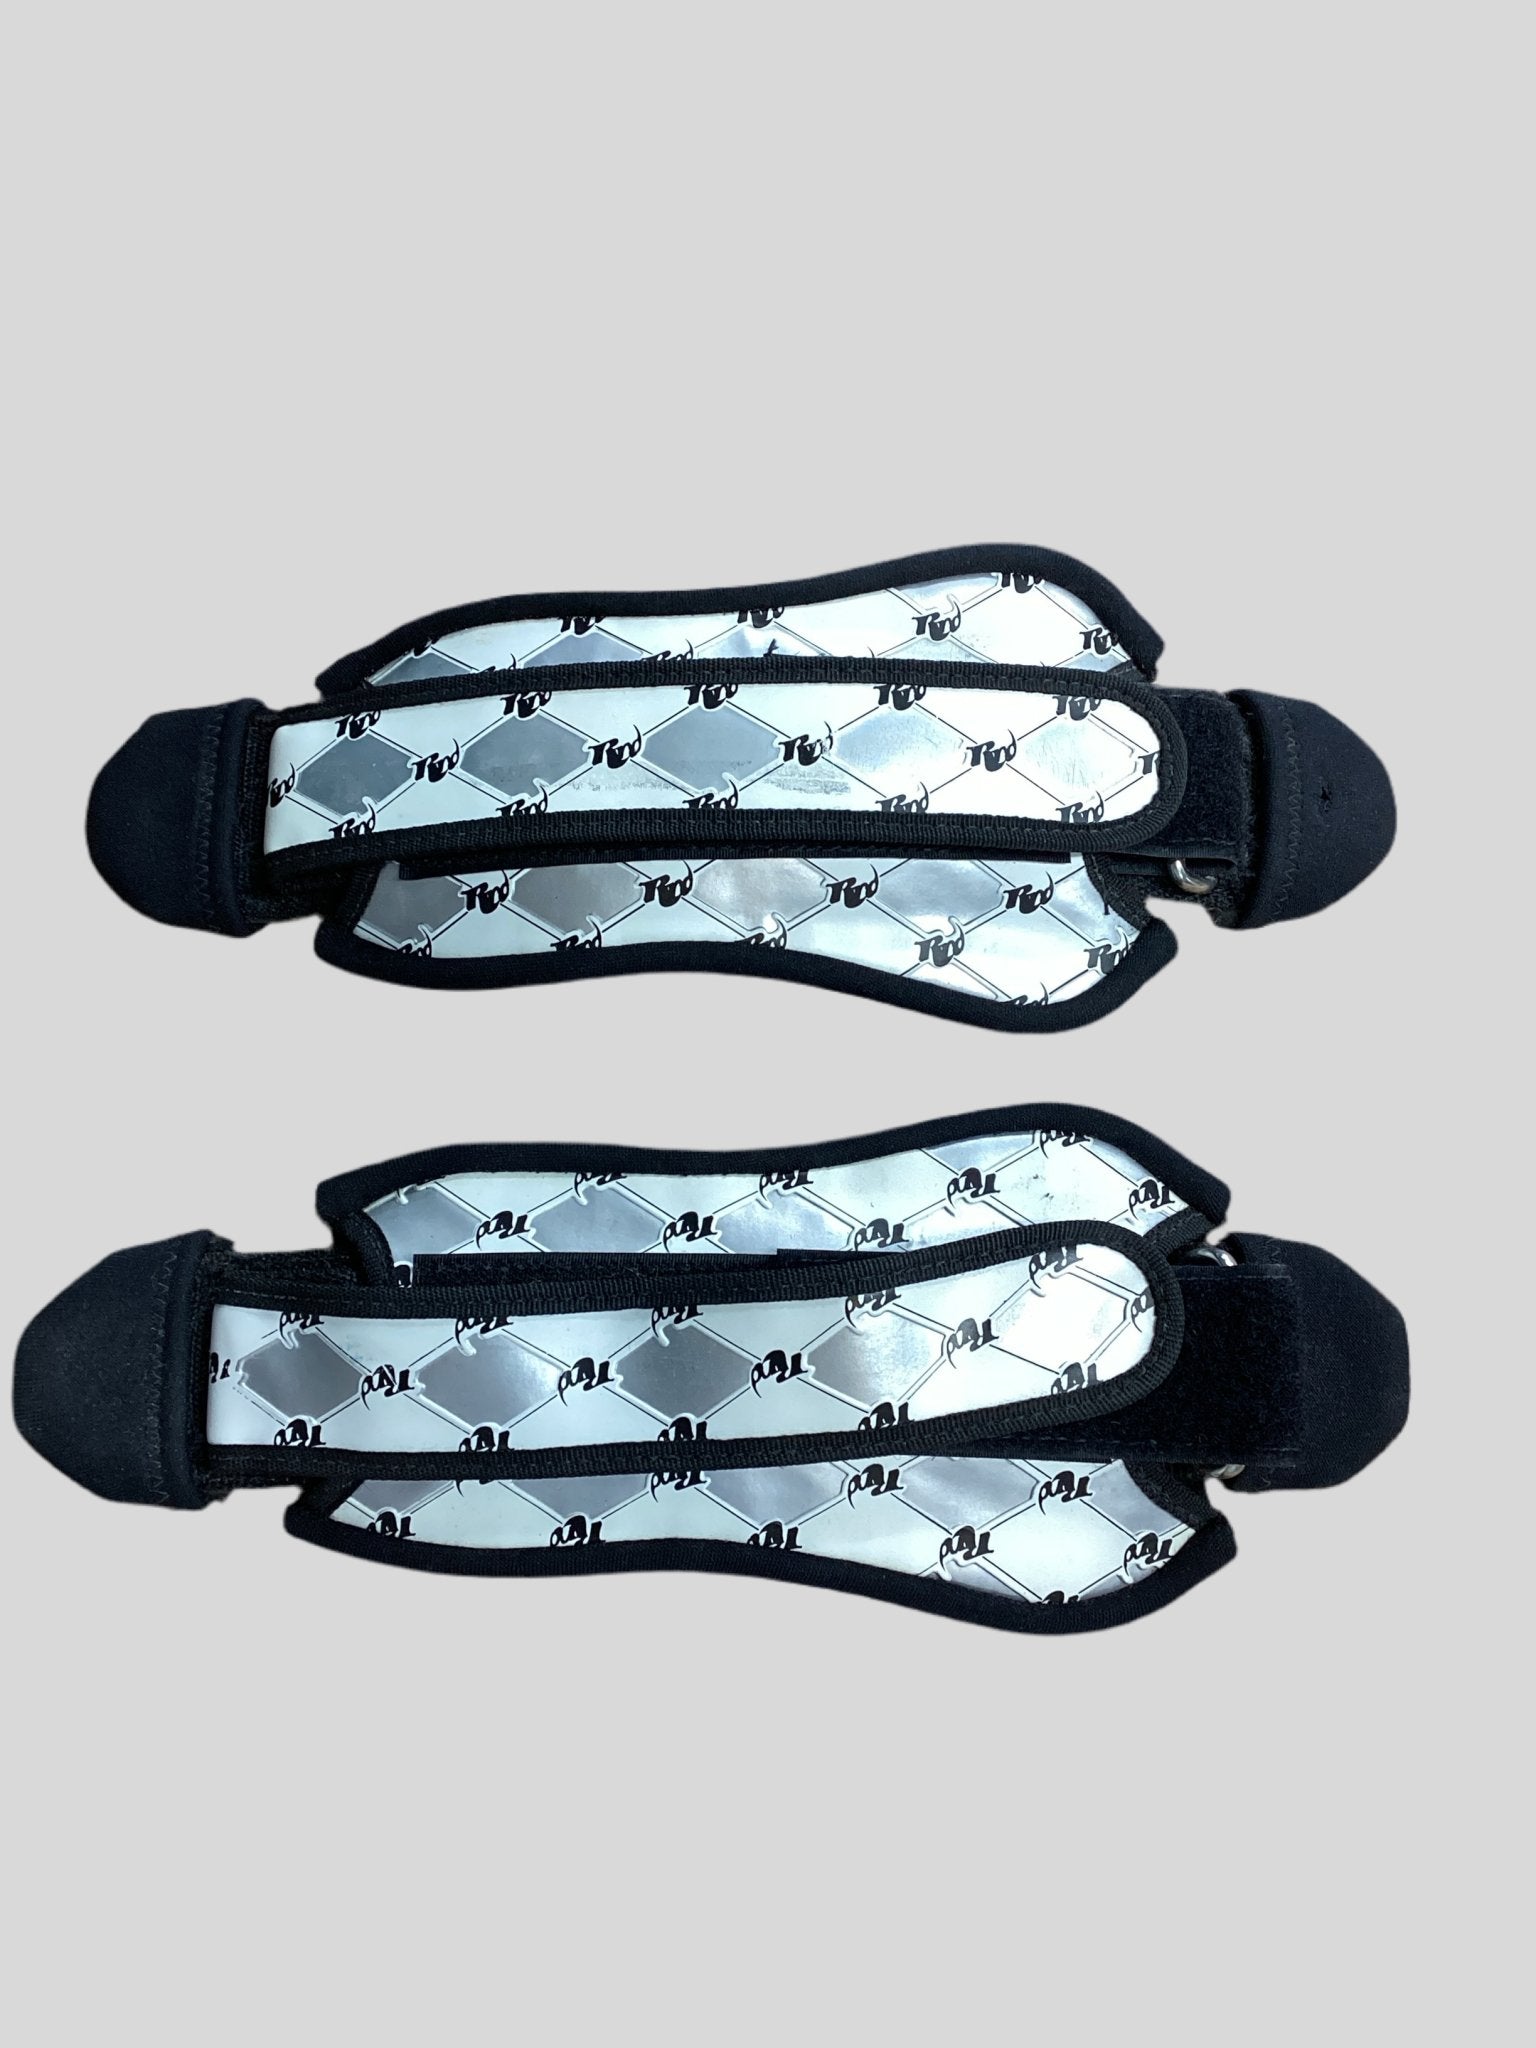 Kitesurfing Footstraps (used) - Worthing Watersports - 58000580460214 - Accessories - RRD